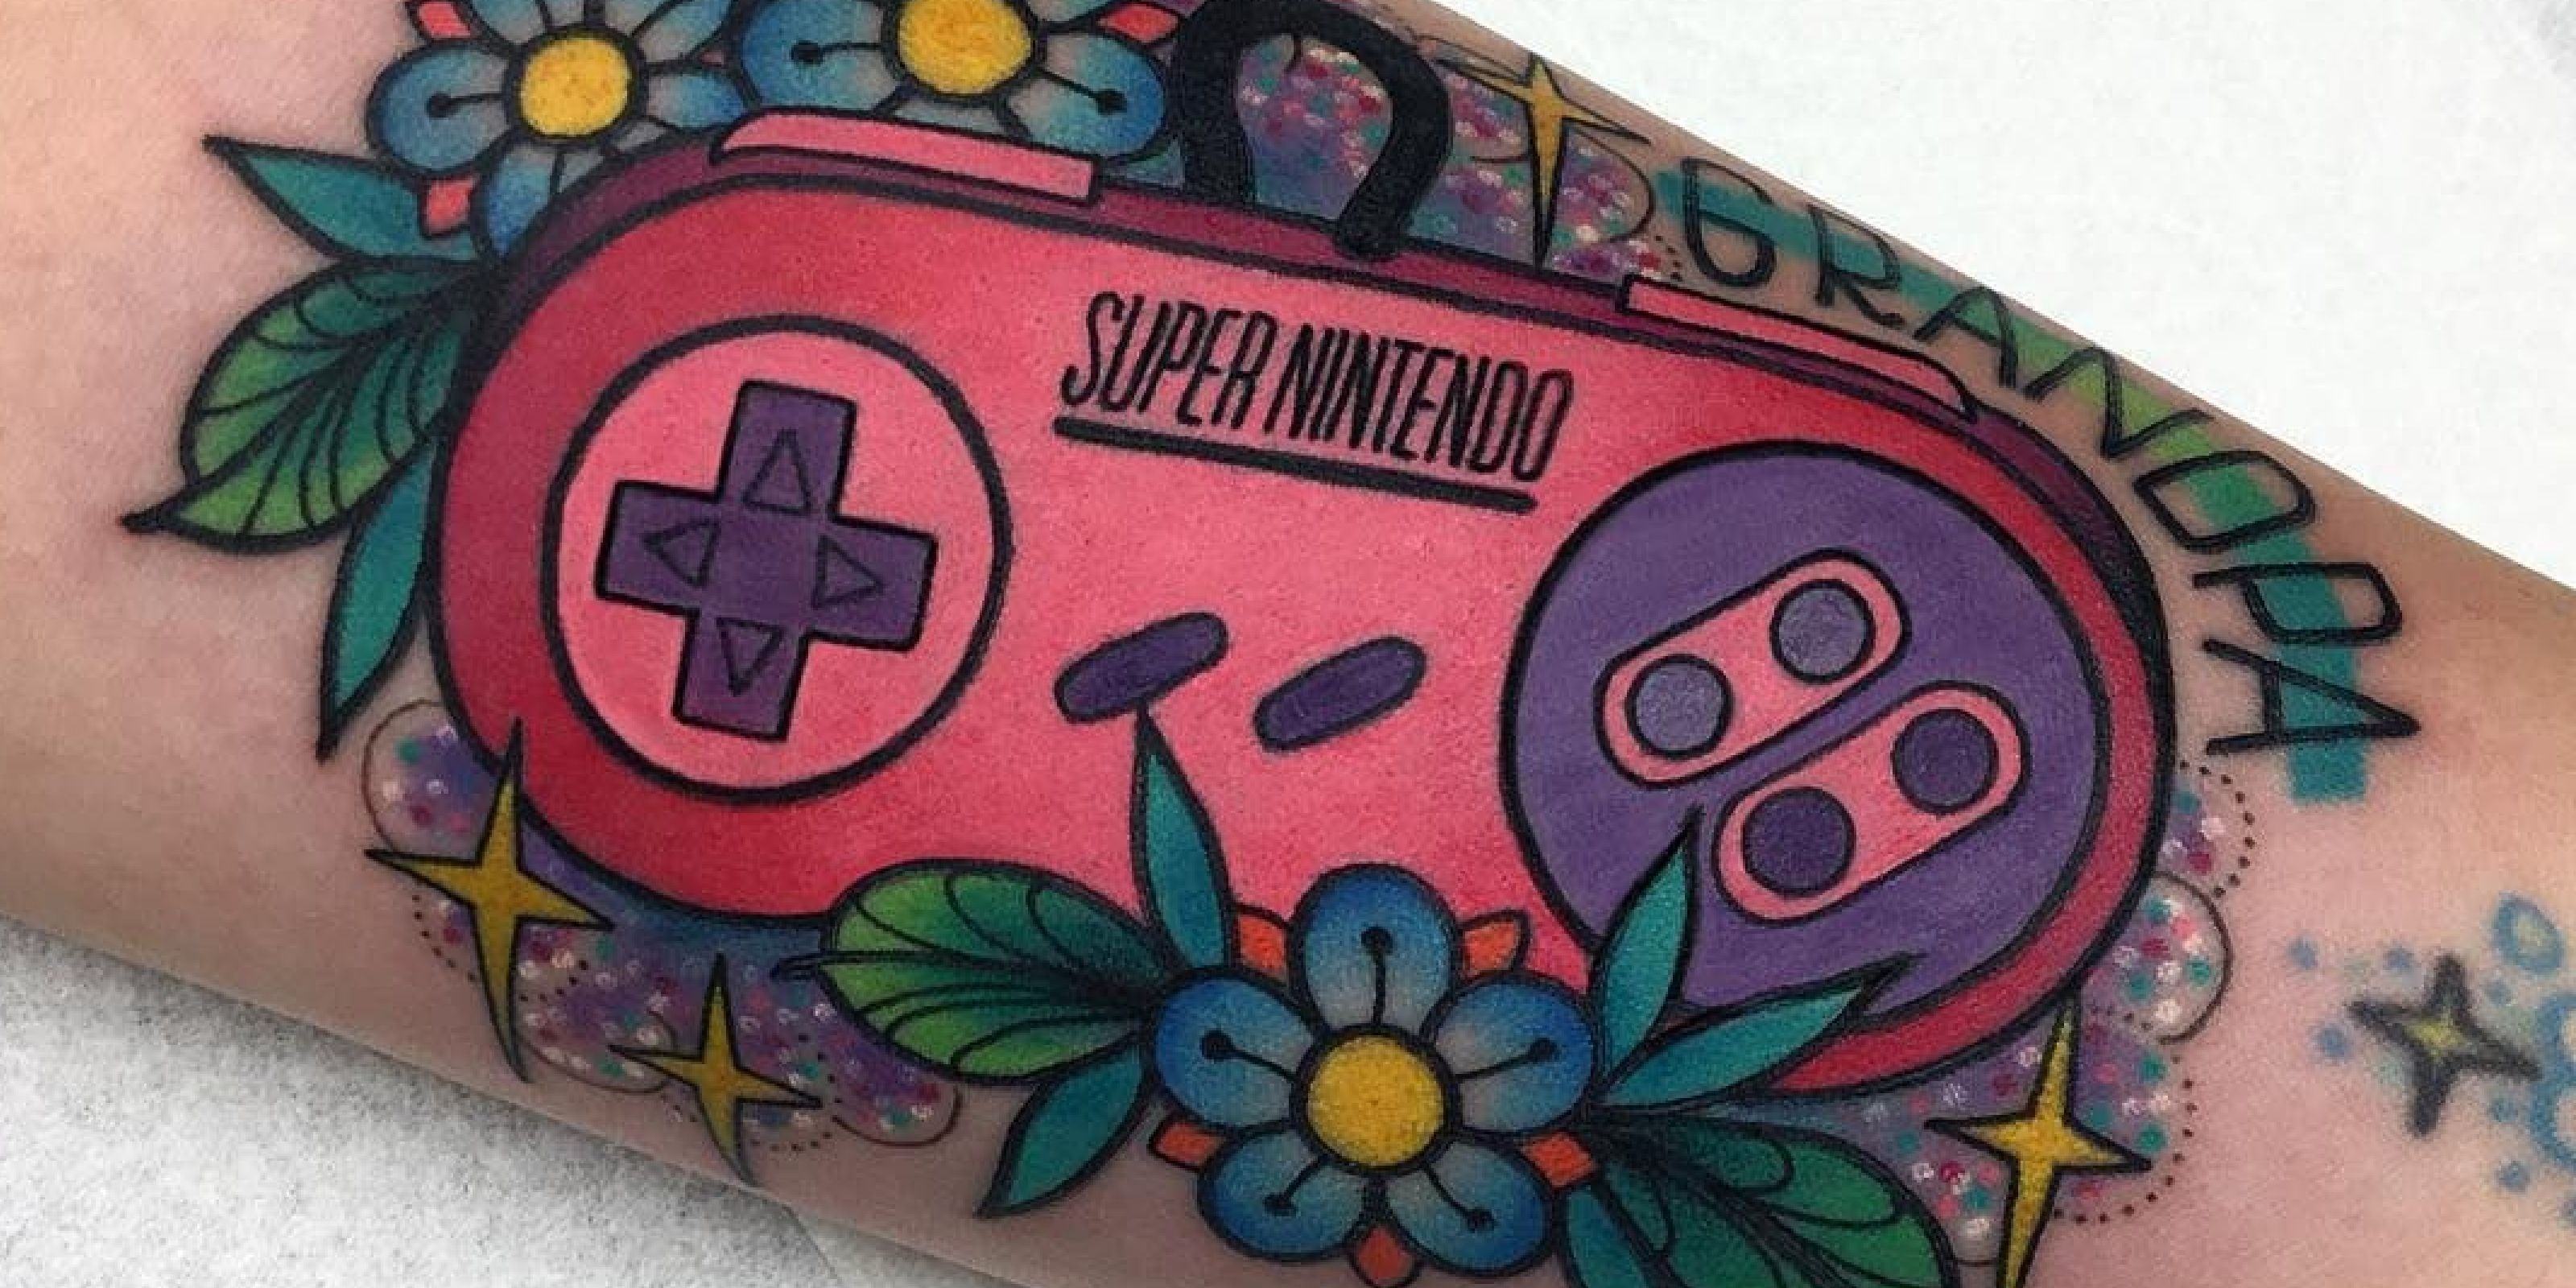 Top 5 worst gaming related tattoos | The Videogame Debate